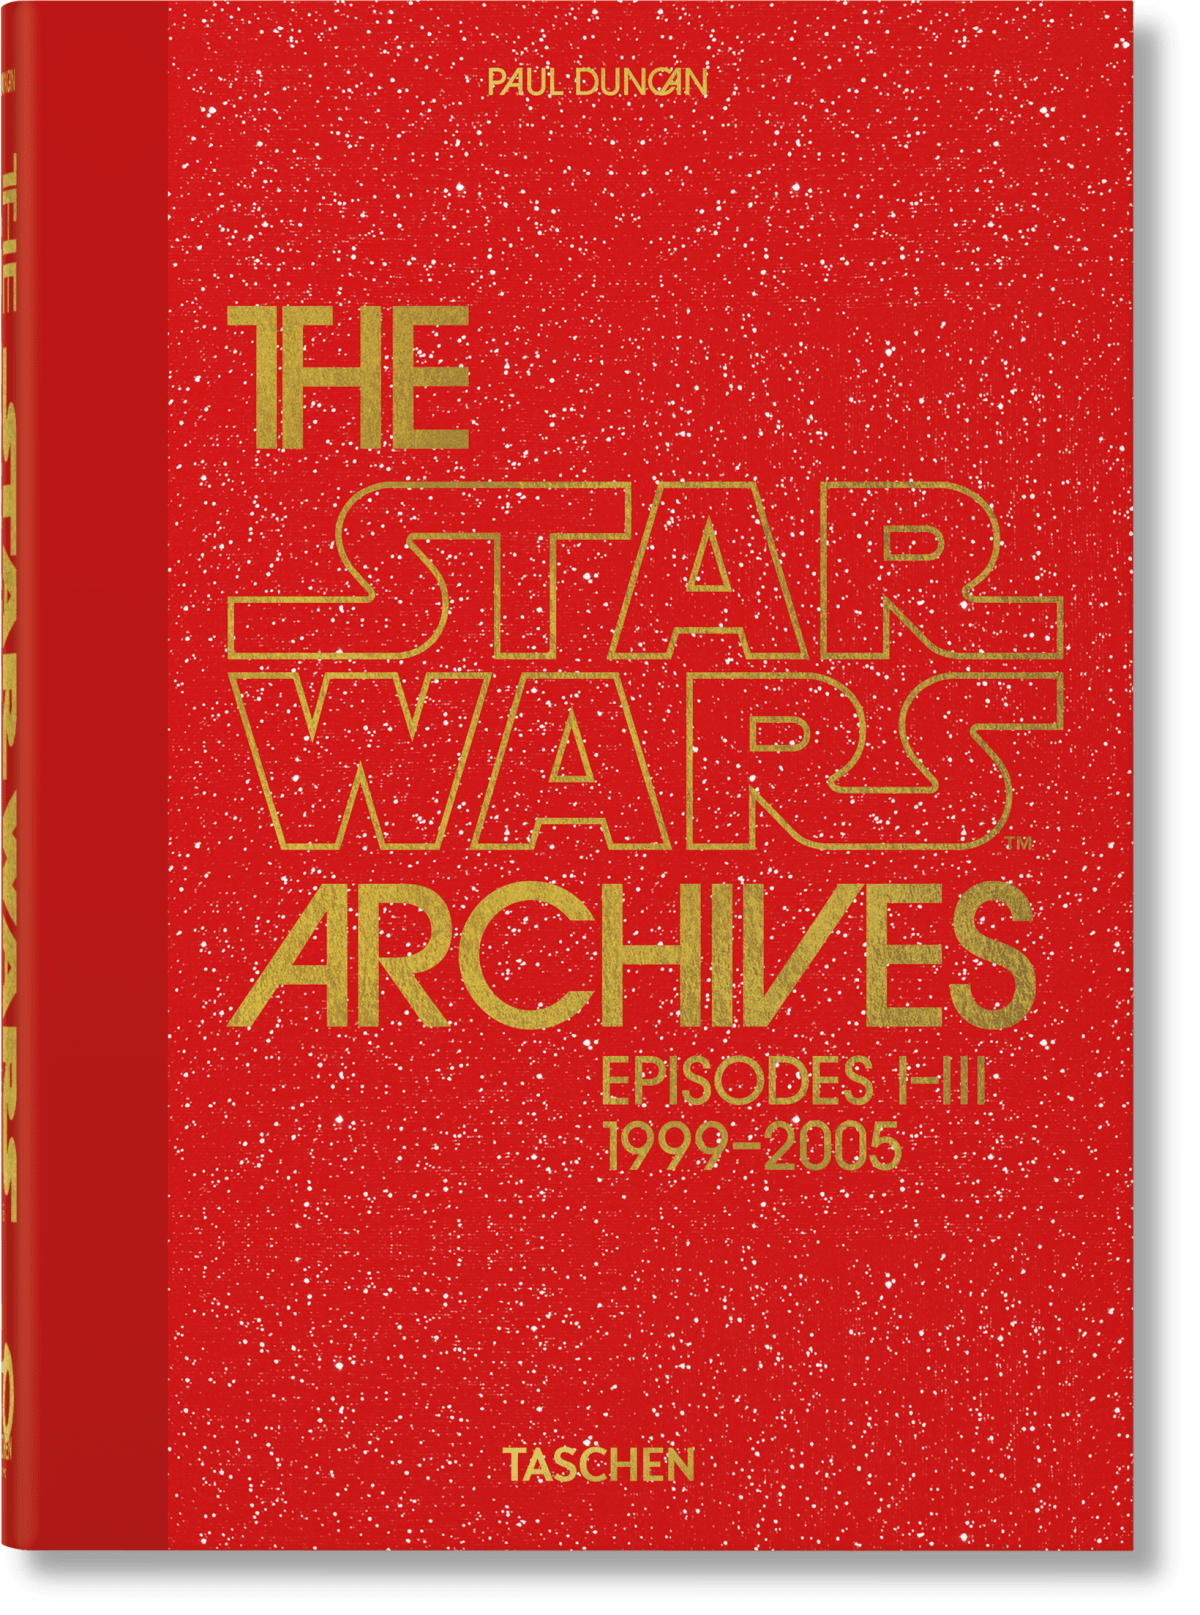 The Star Wars Archives. 1999–2005. 40th Ed.